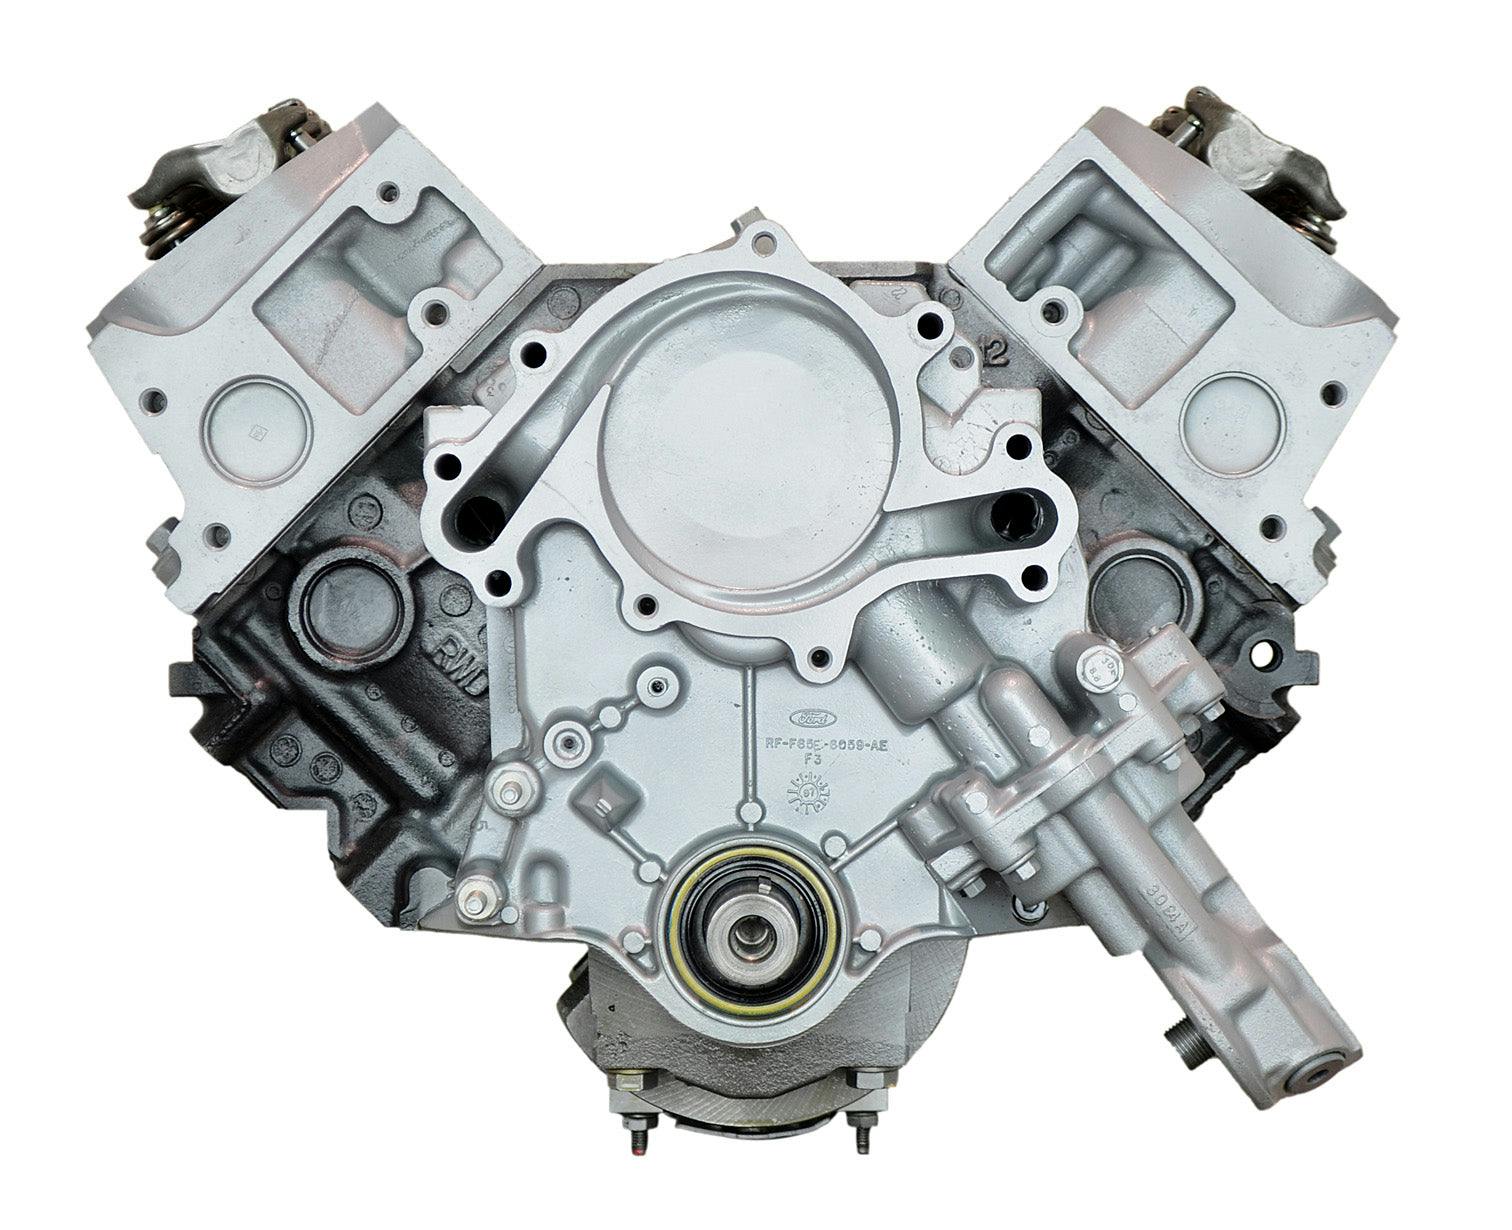 3.8L V6 Engine for 1999-2000 Ford Mustang